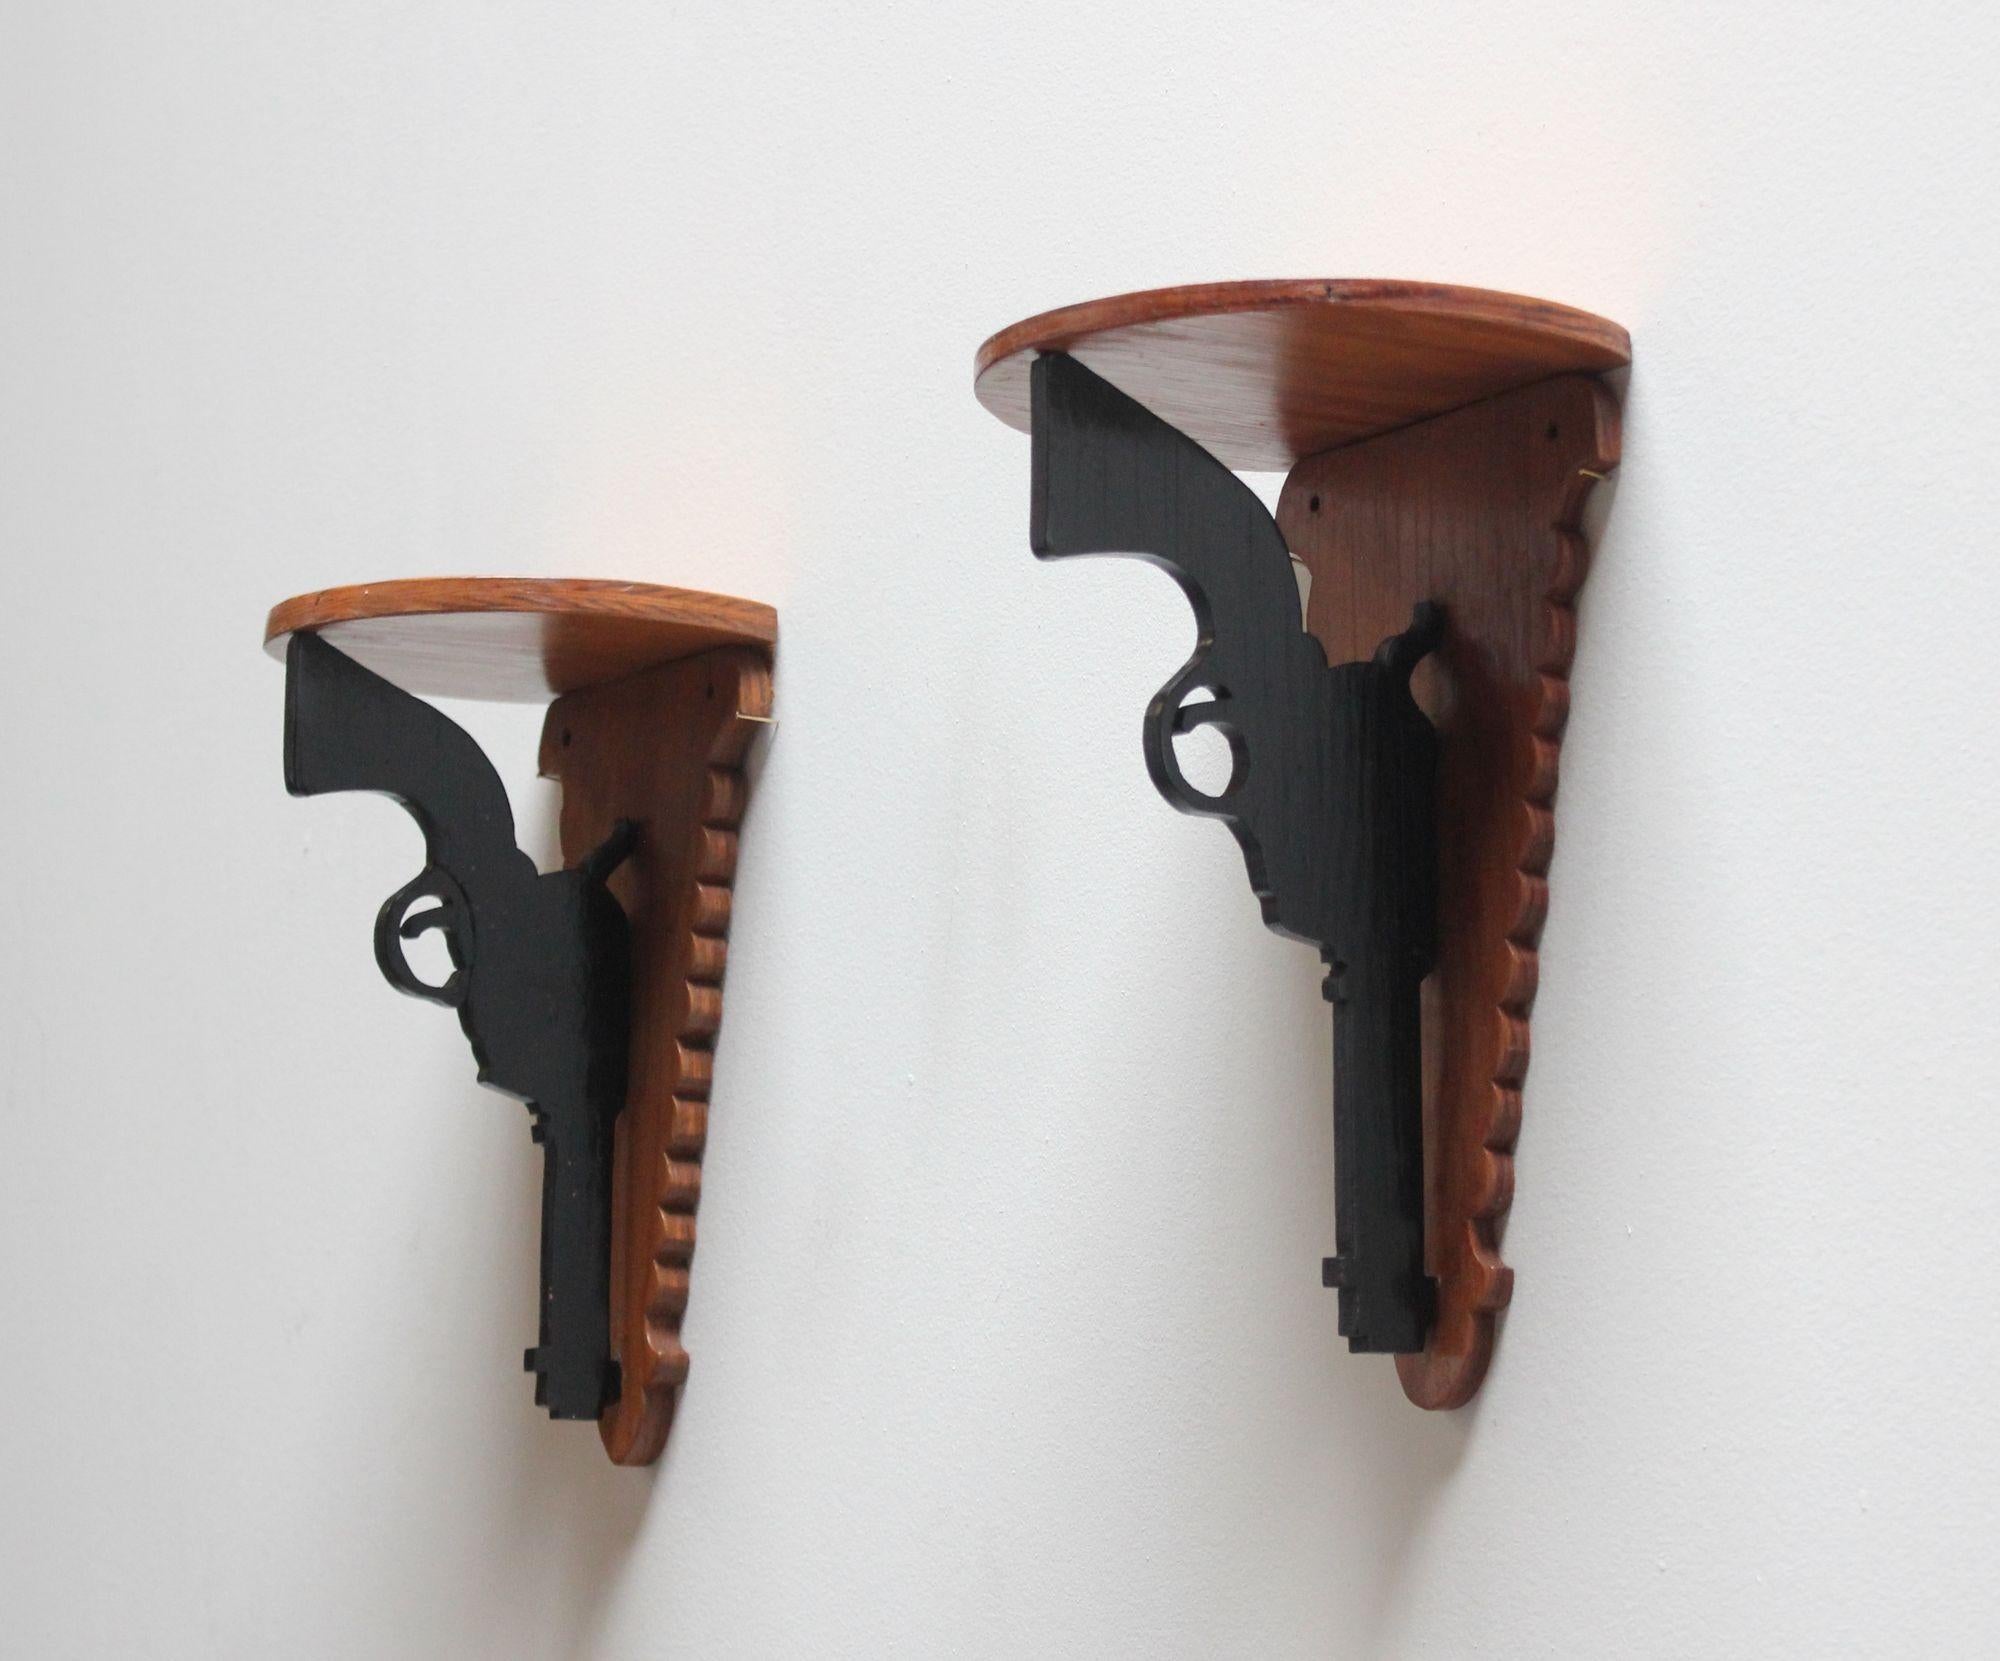 American Pair of Hand-Carved and Painted Folk Art Pistol Wall Brackets / Corner Shelves For Sale